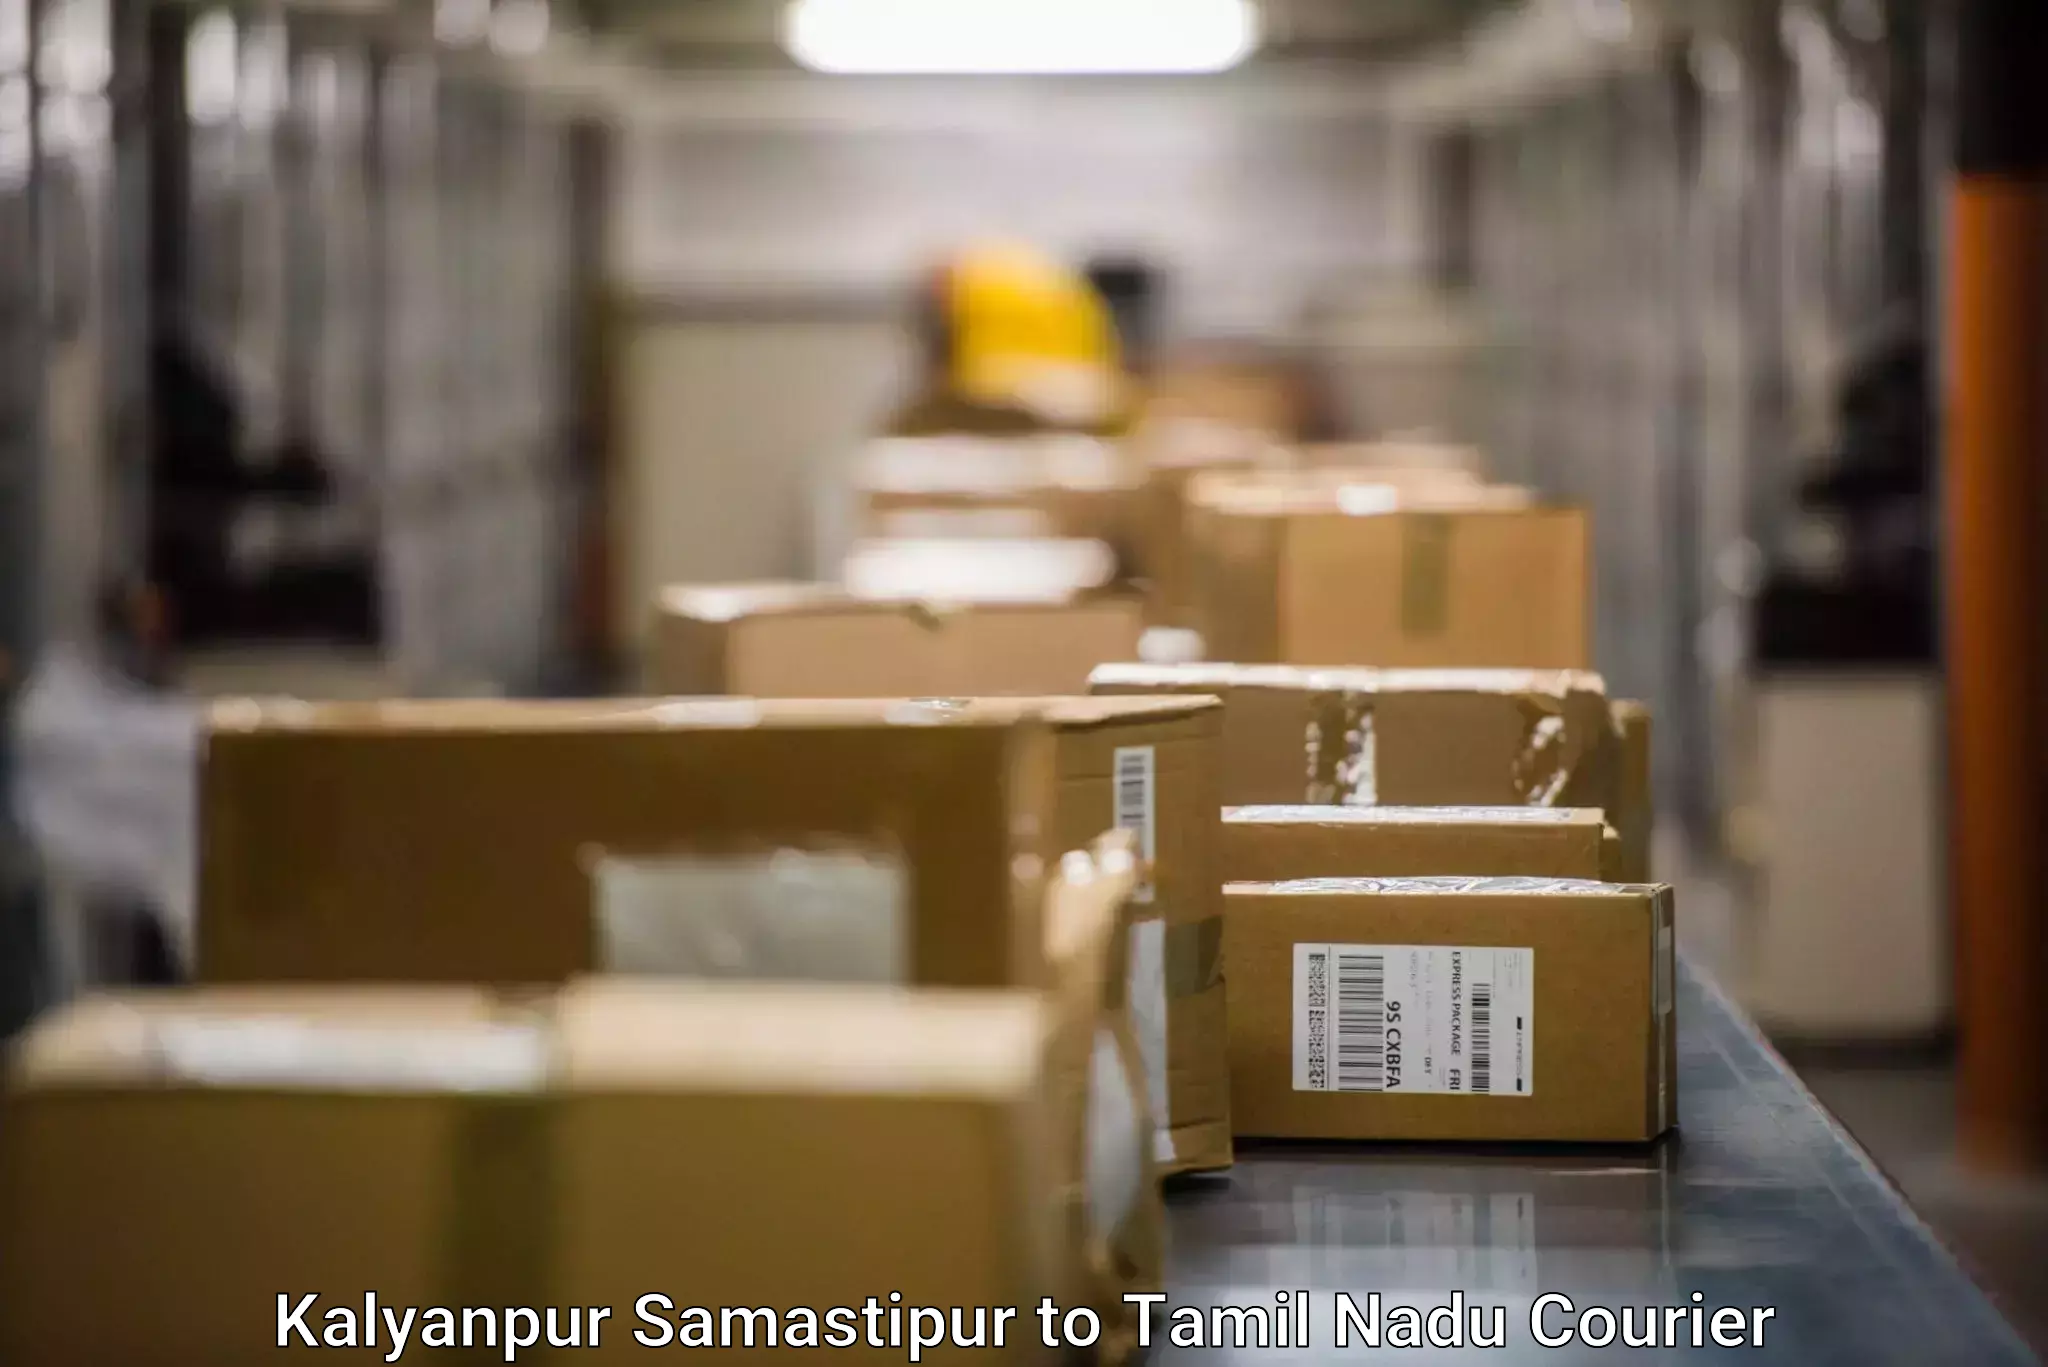 Same-day delivery solutions Kalyanpur Samastipur to Dindigul